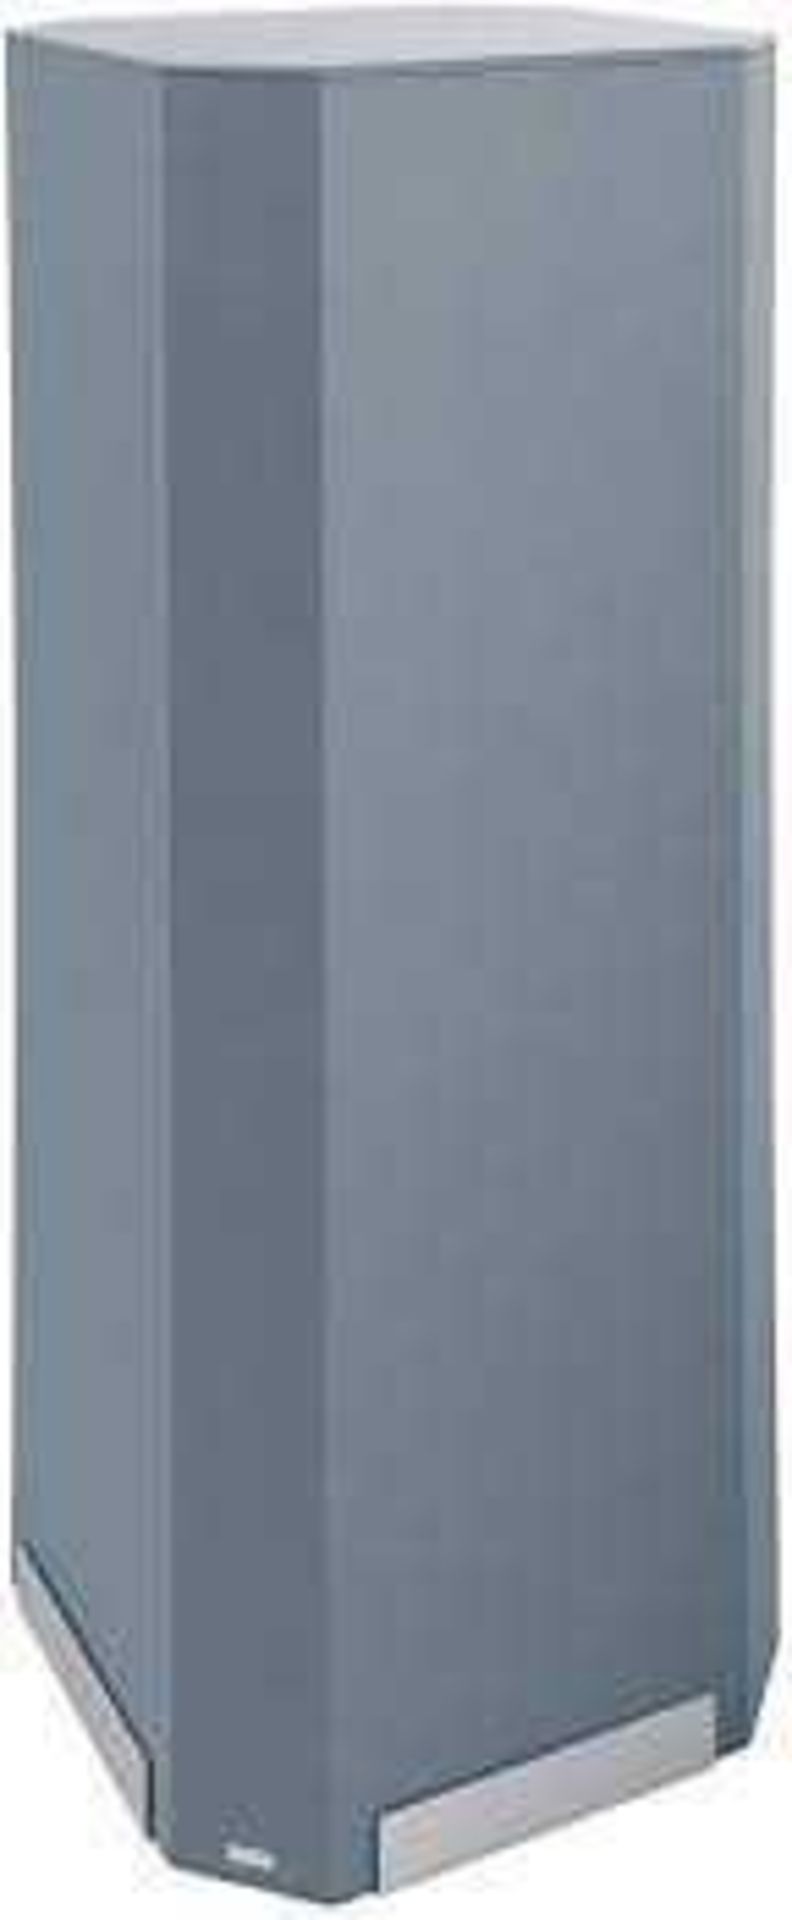 RRP £1200 Boxed Sigel Sb610 Acoustic Tower, 45 X 180 X 45 Cm, Dark Grey, 1 Piece - Sound Balance(Sp) - Image 3 of 4